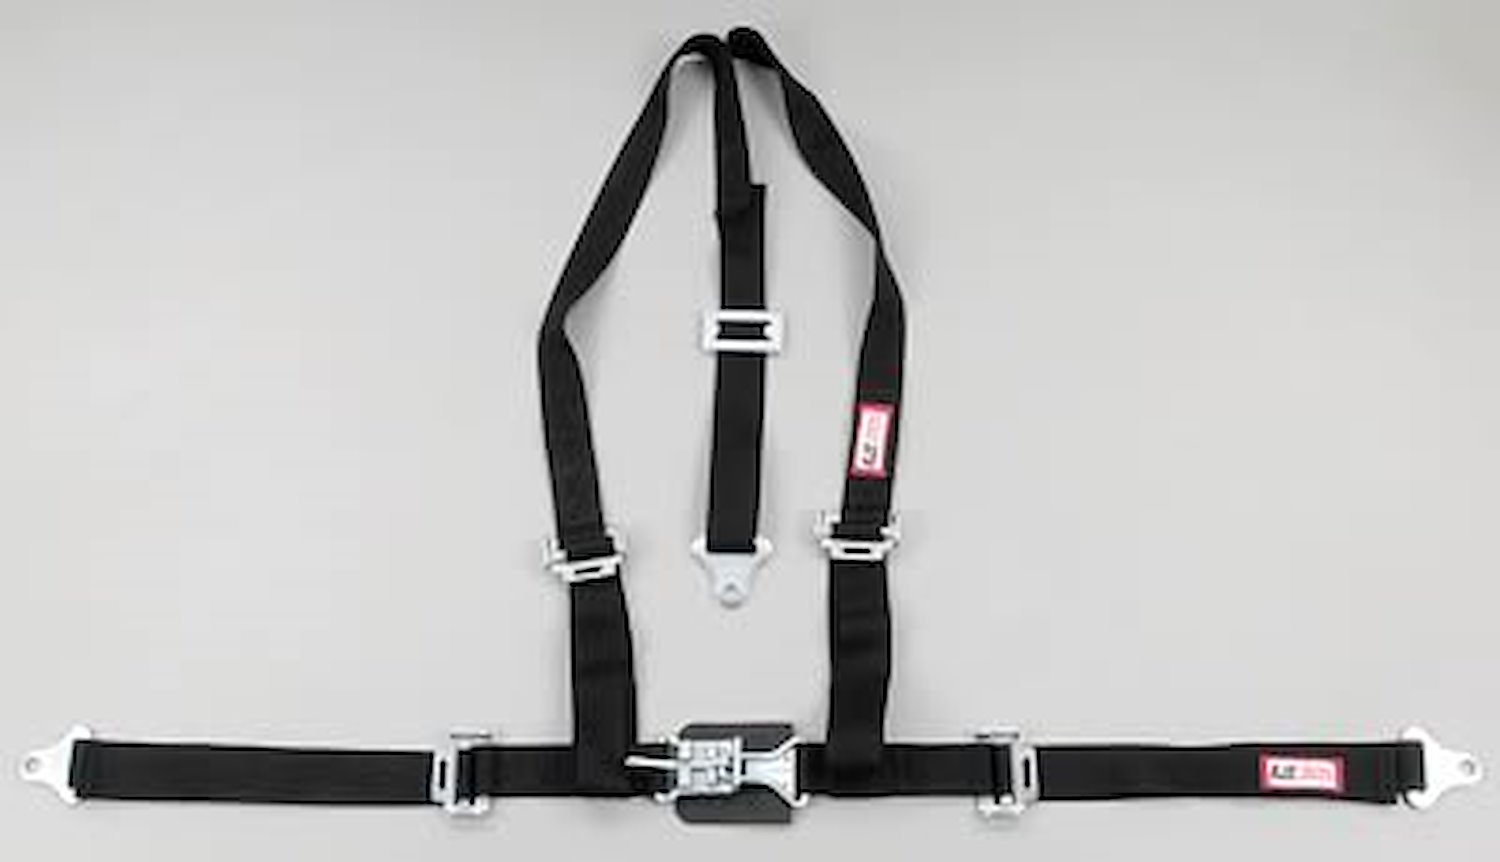 NON-SFI L&L HARNESS 3 PULL UP Lap Belt SNAP SEWN IN 2 S.H. Individual ROLL BAR Mount w/STERNUM STRAP WRAP/SNAP BLUE